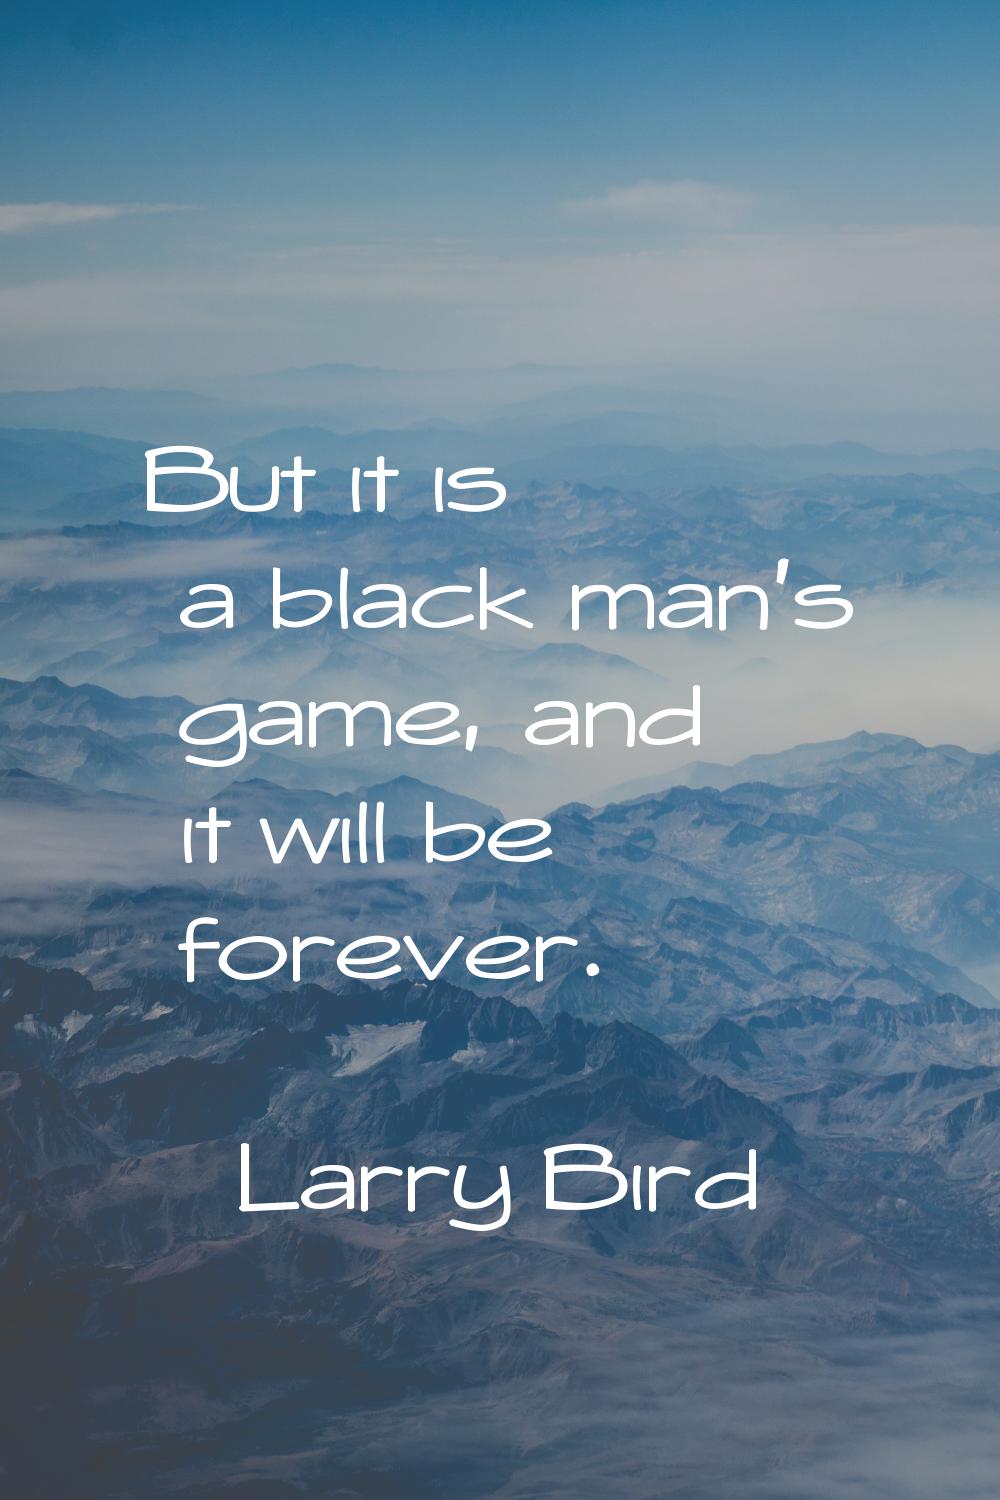 But it is a black man's game, and it will be forever.